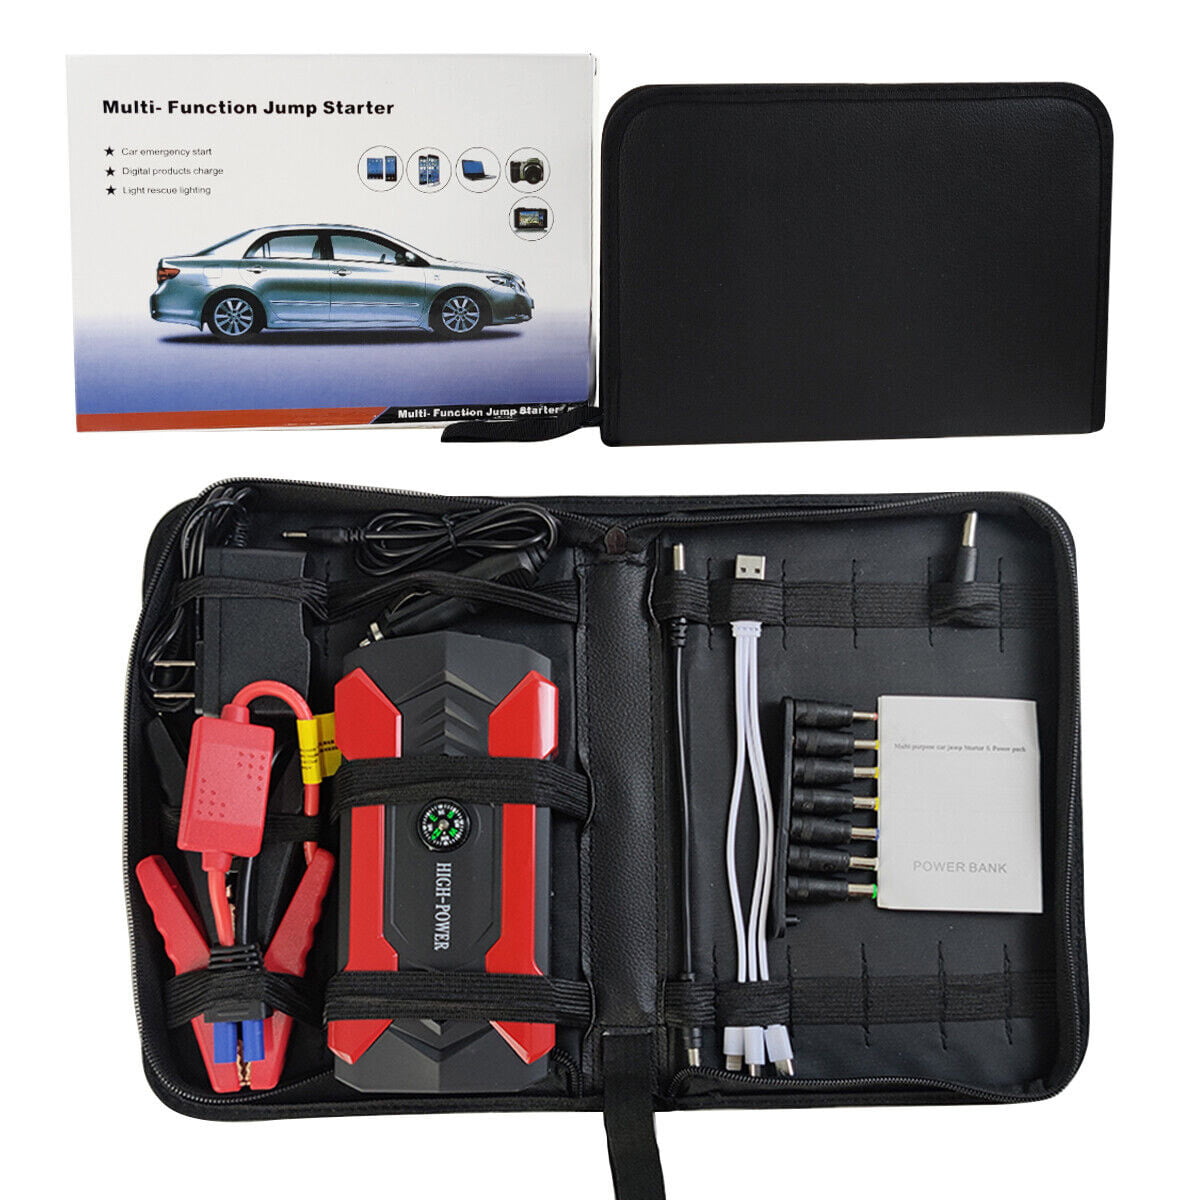 12 Volt Car Battery Booster Pack Portable Power Bank Charger multi